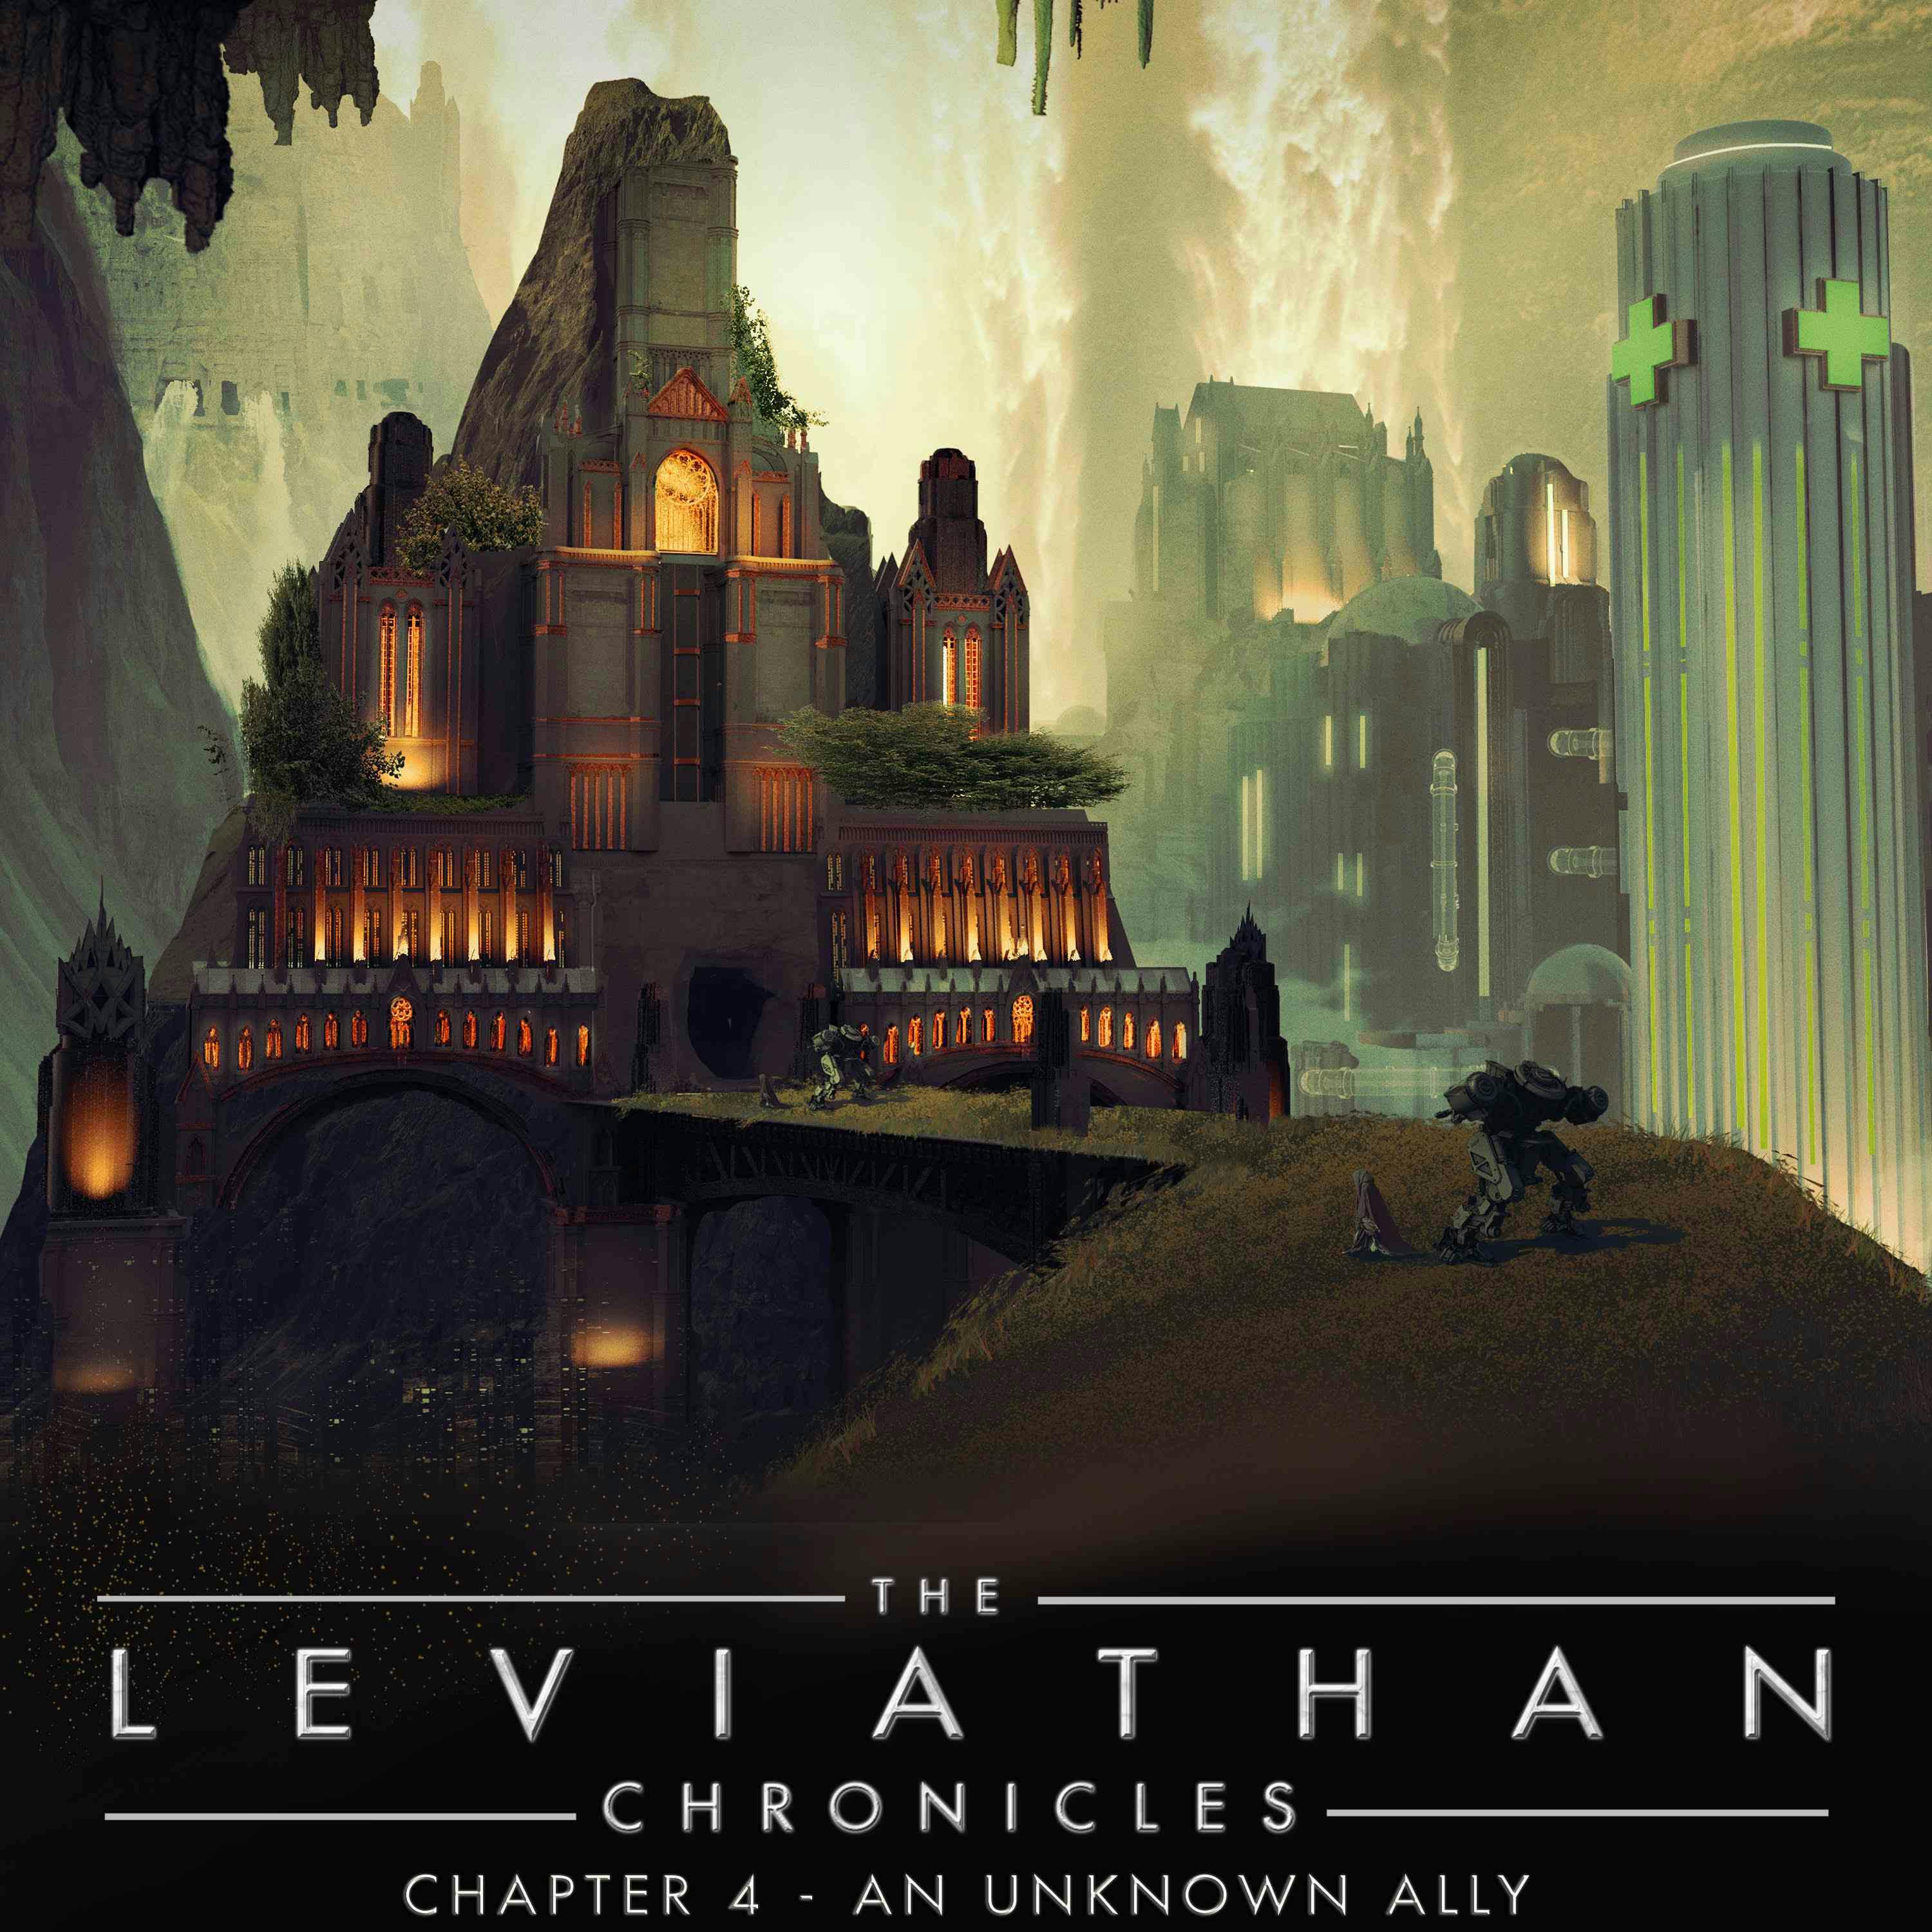 The Leviathan Chronicles | Chapter 4 - An Unknown Ally